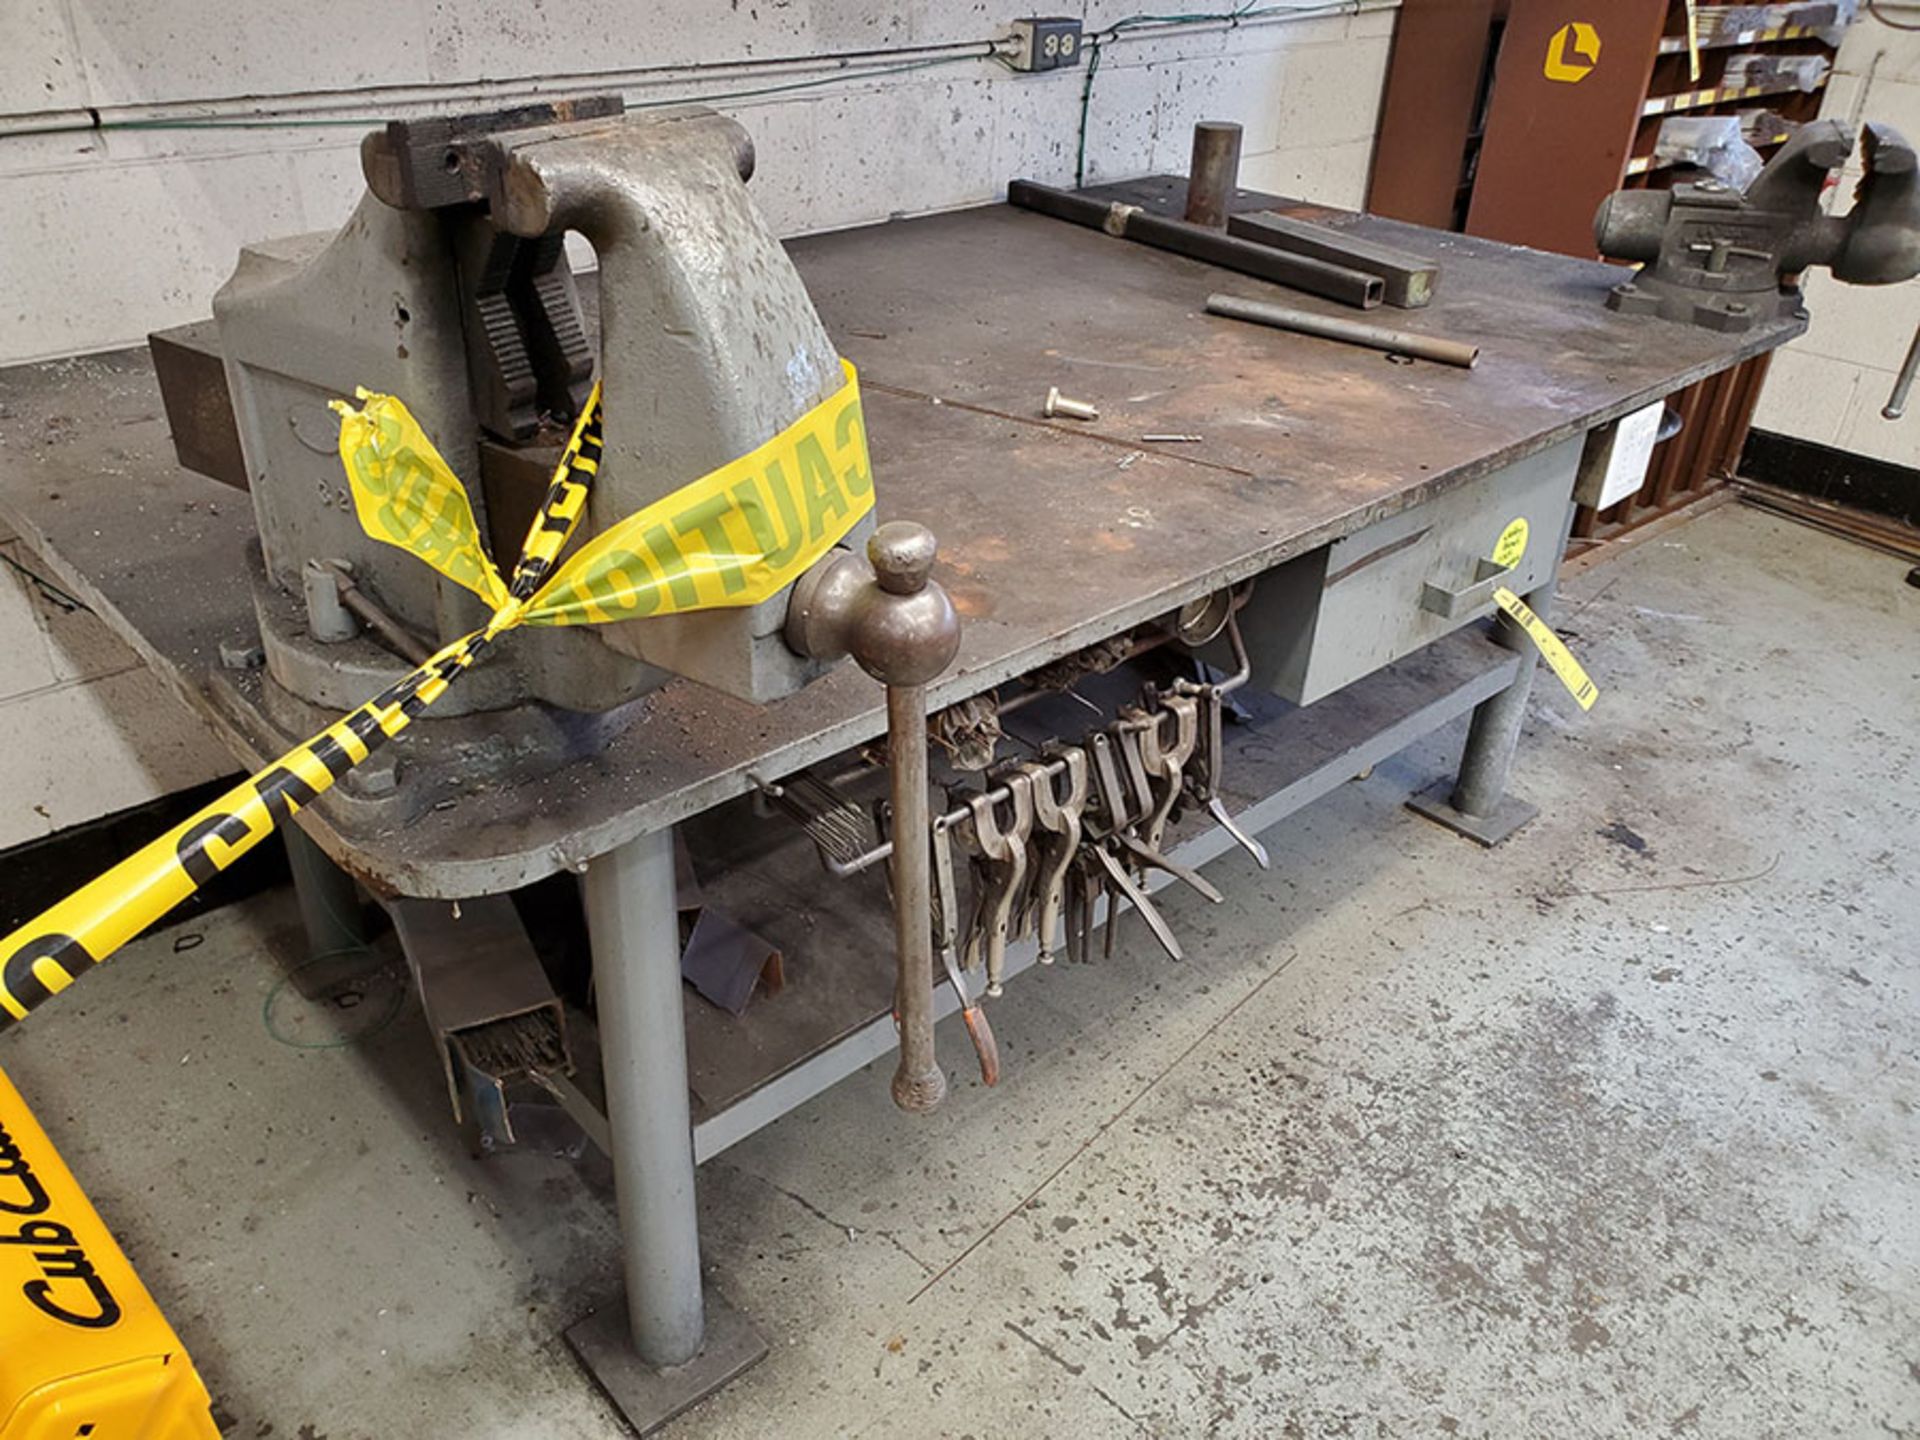 WELDING TABLE 4' X 7' X 1'' WITH L-3 STARRETT ATHOL VISE 326 AND 6 1/2'' JAW VISE - Image 3 of 5